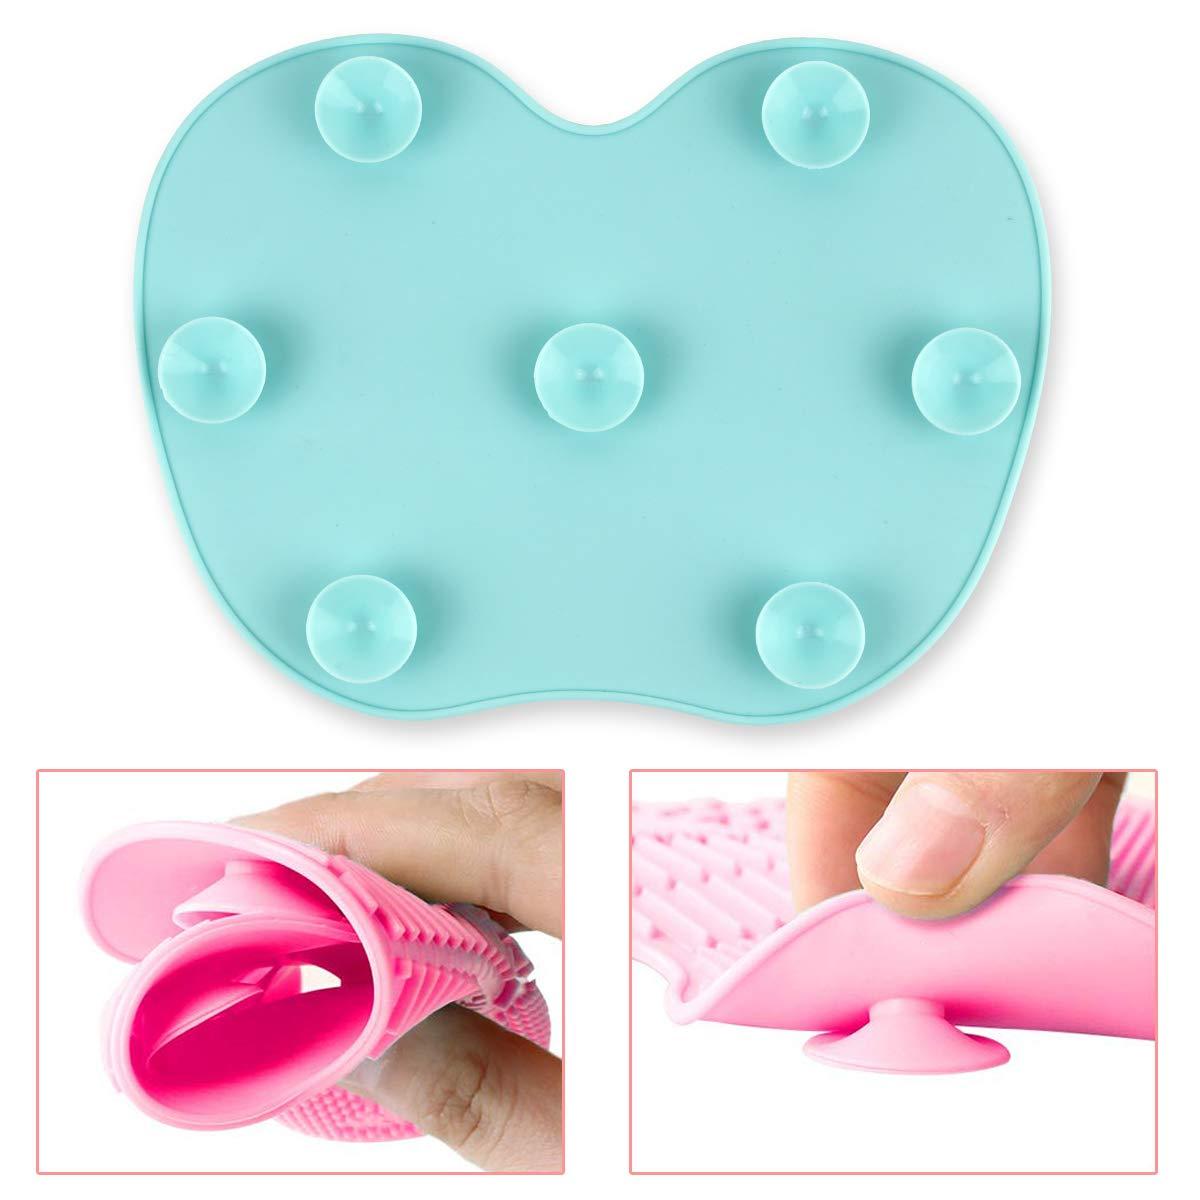 Silicone Makeup Brush Cleaner Pad - Efficient Washing Scrubber